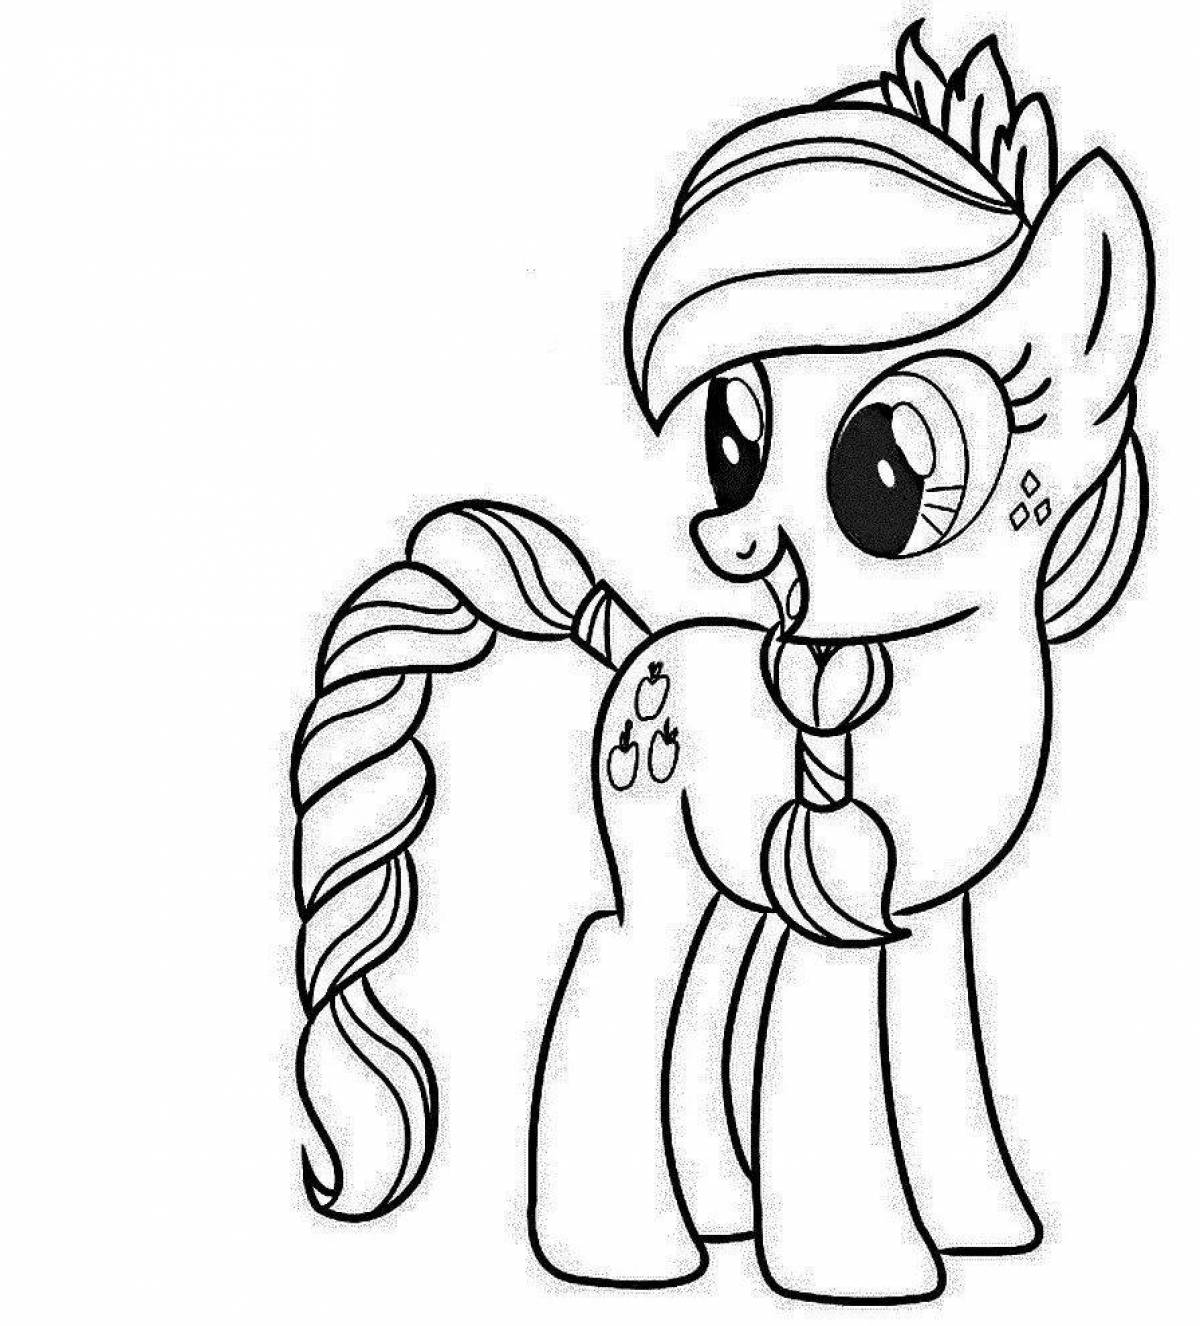 Adorable little pony coloring game